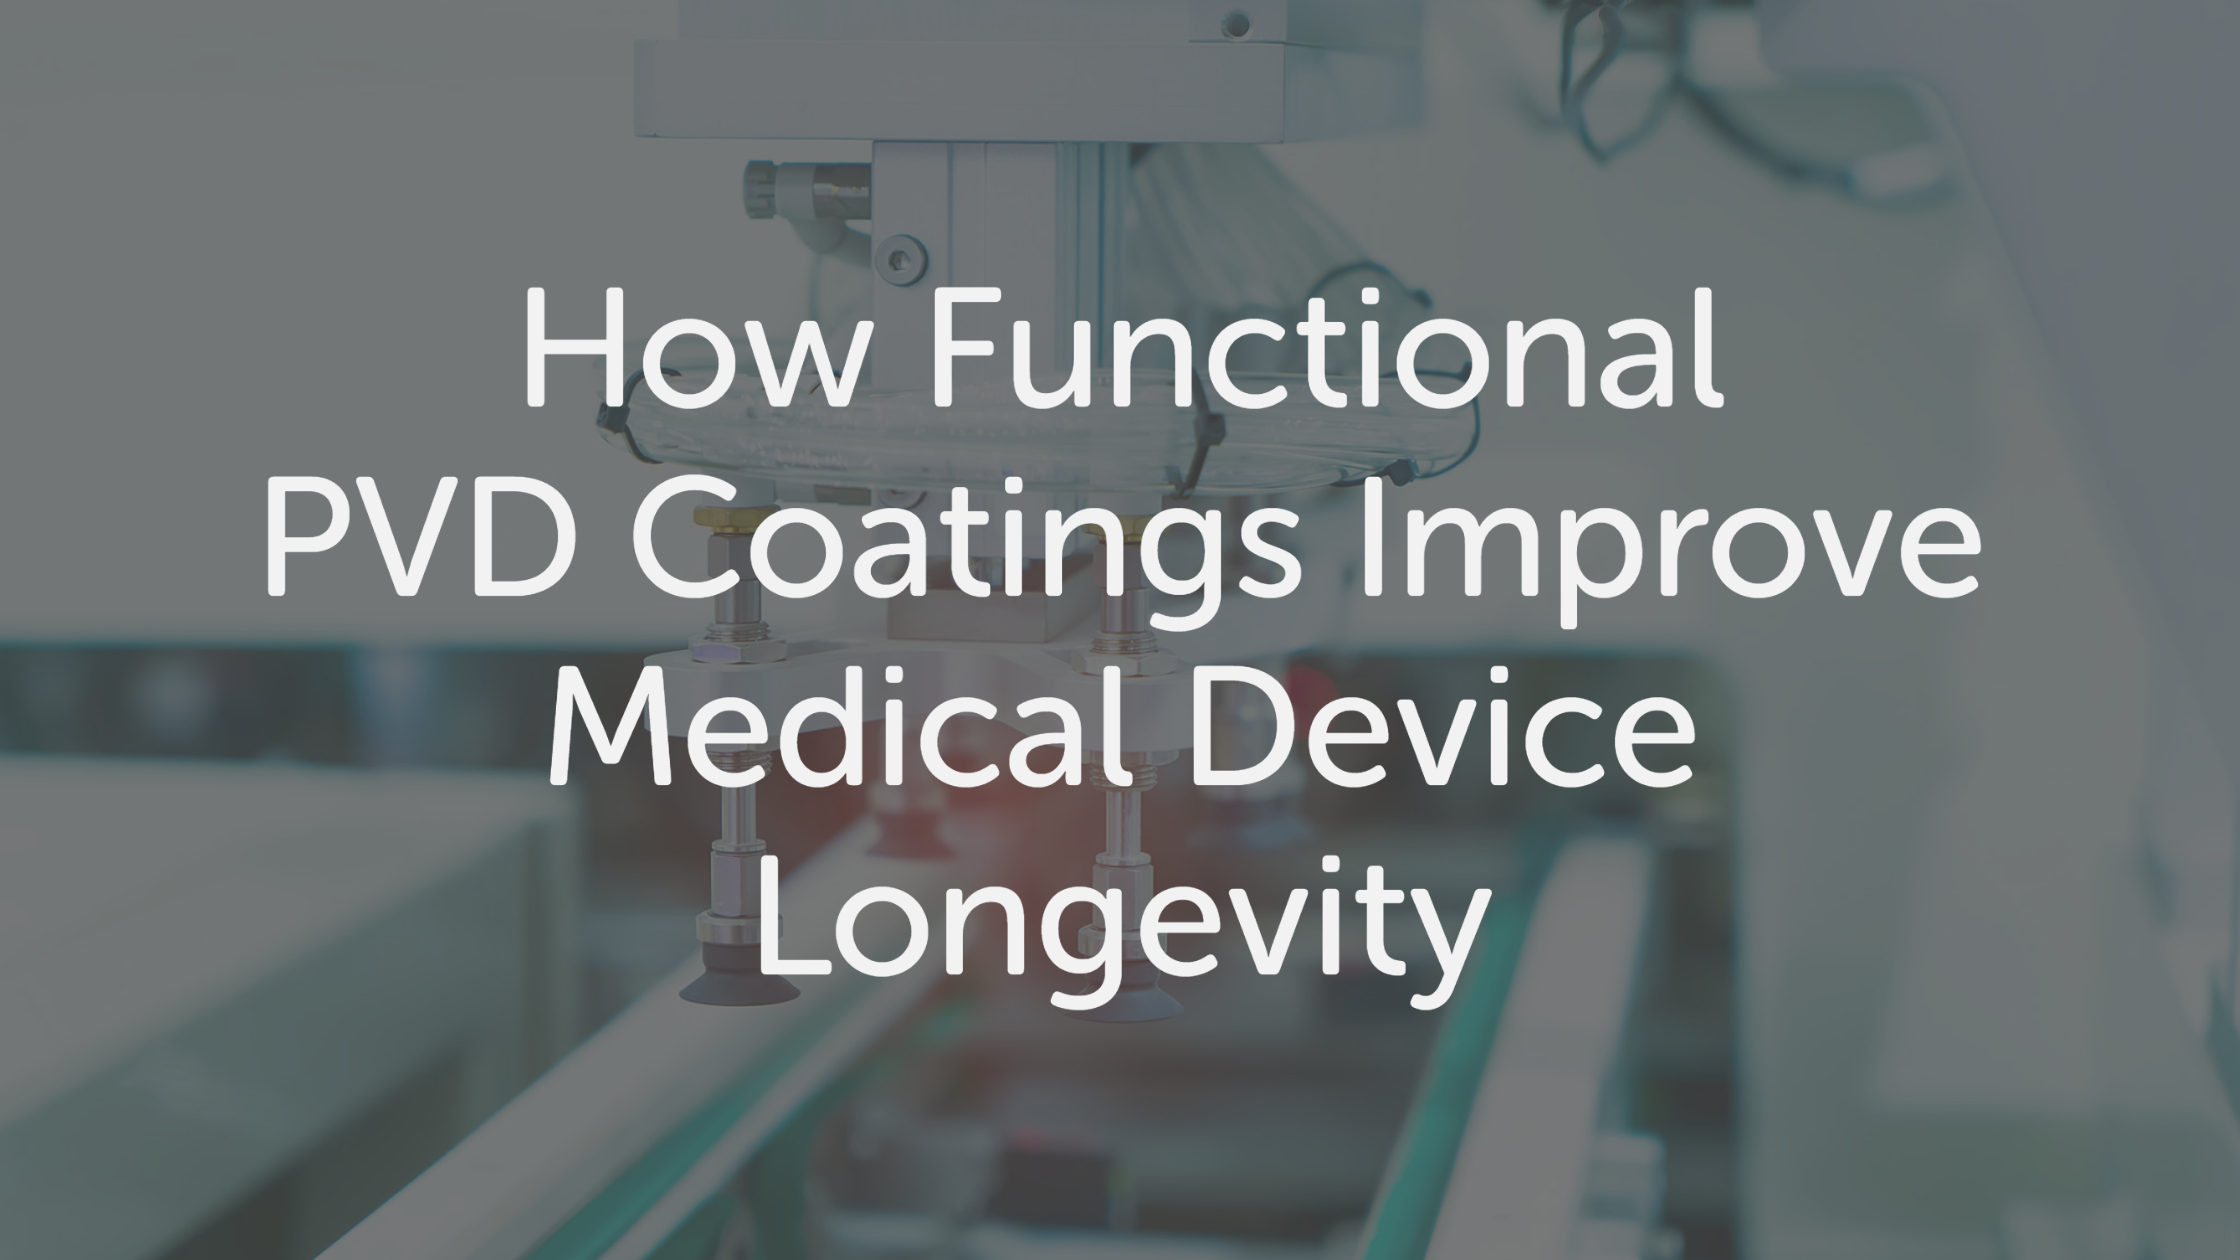 PVD Coatings for Medical Devices